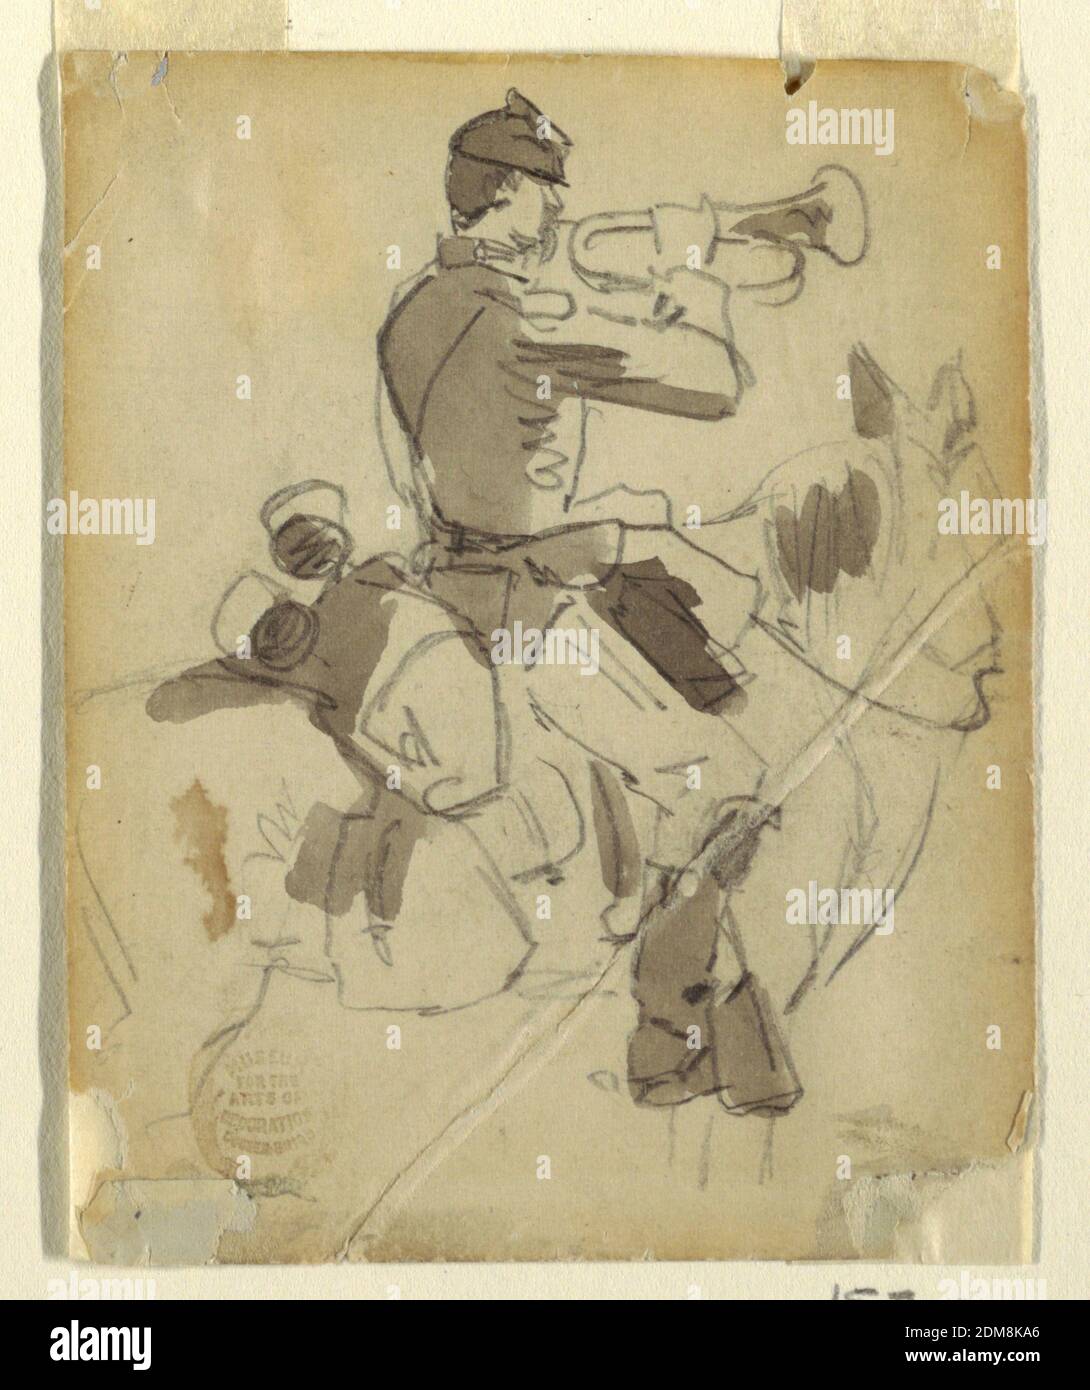 Mounted Bugler, Winslow Homer, American, 1836–1910, Graphite, brush and gray wash on off-white paper, Vertical view of a mounted bugler., USA, 1862, figures, Drawing Stock Photo